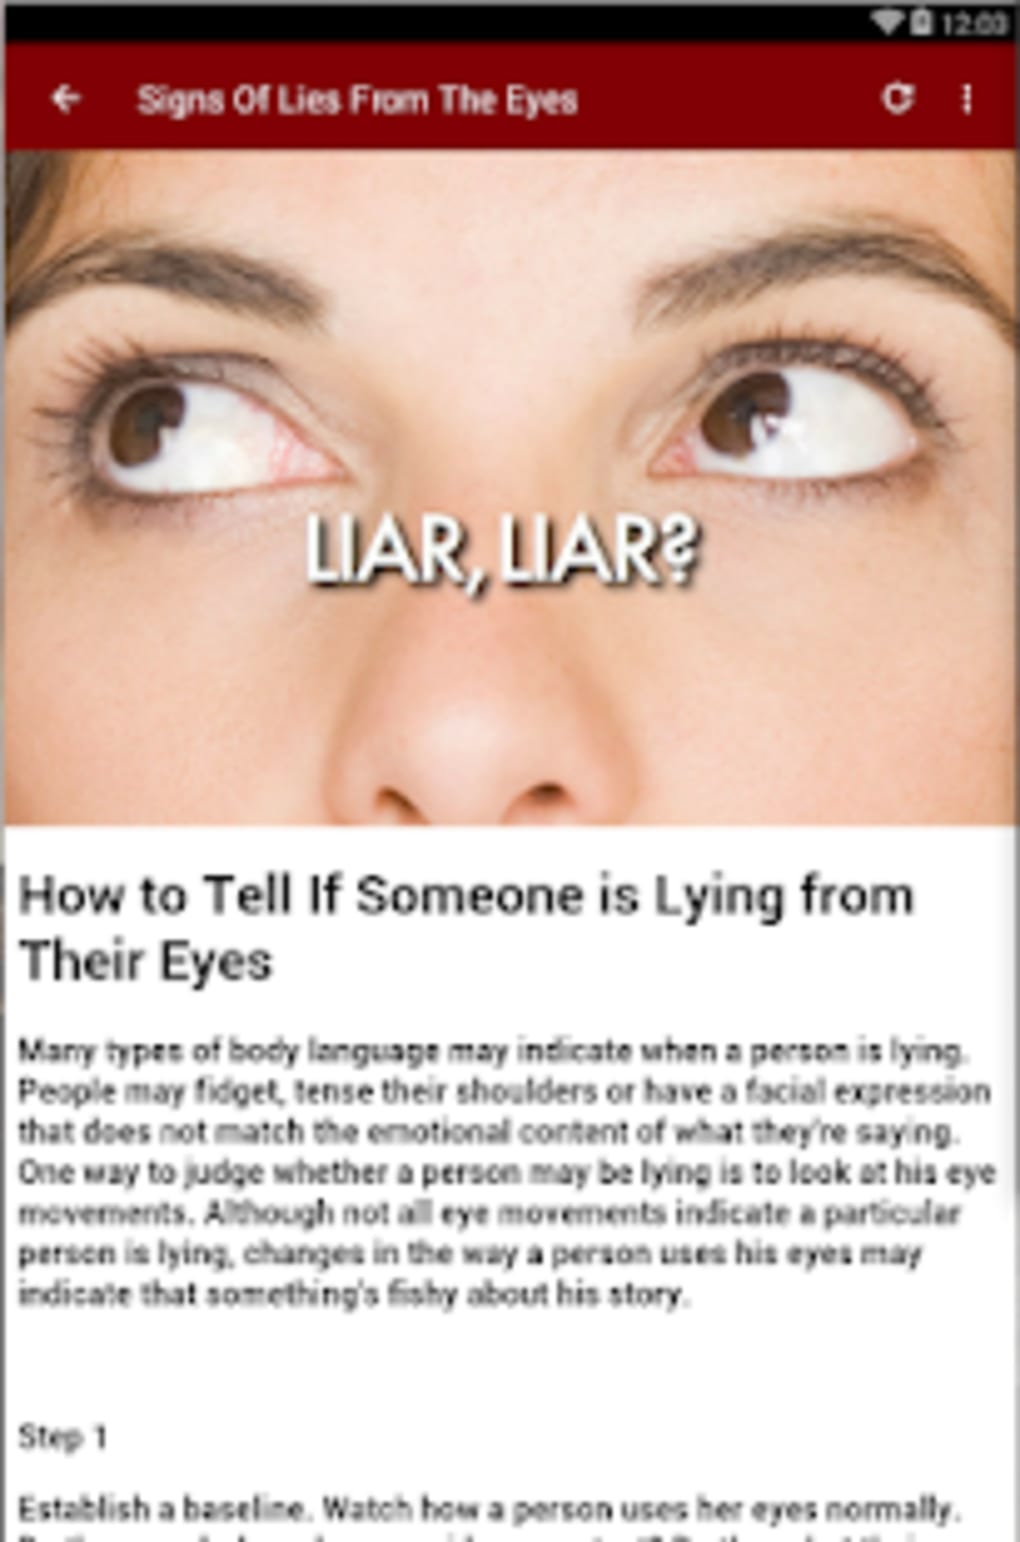 How to Tell if Someone Is Lying